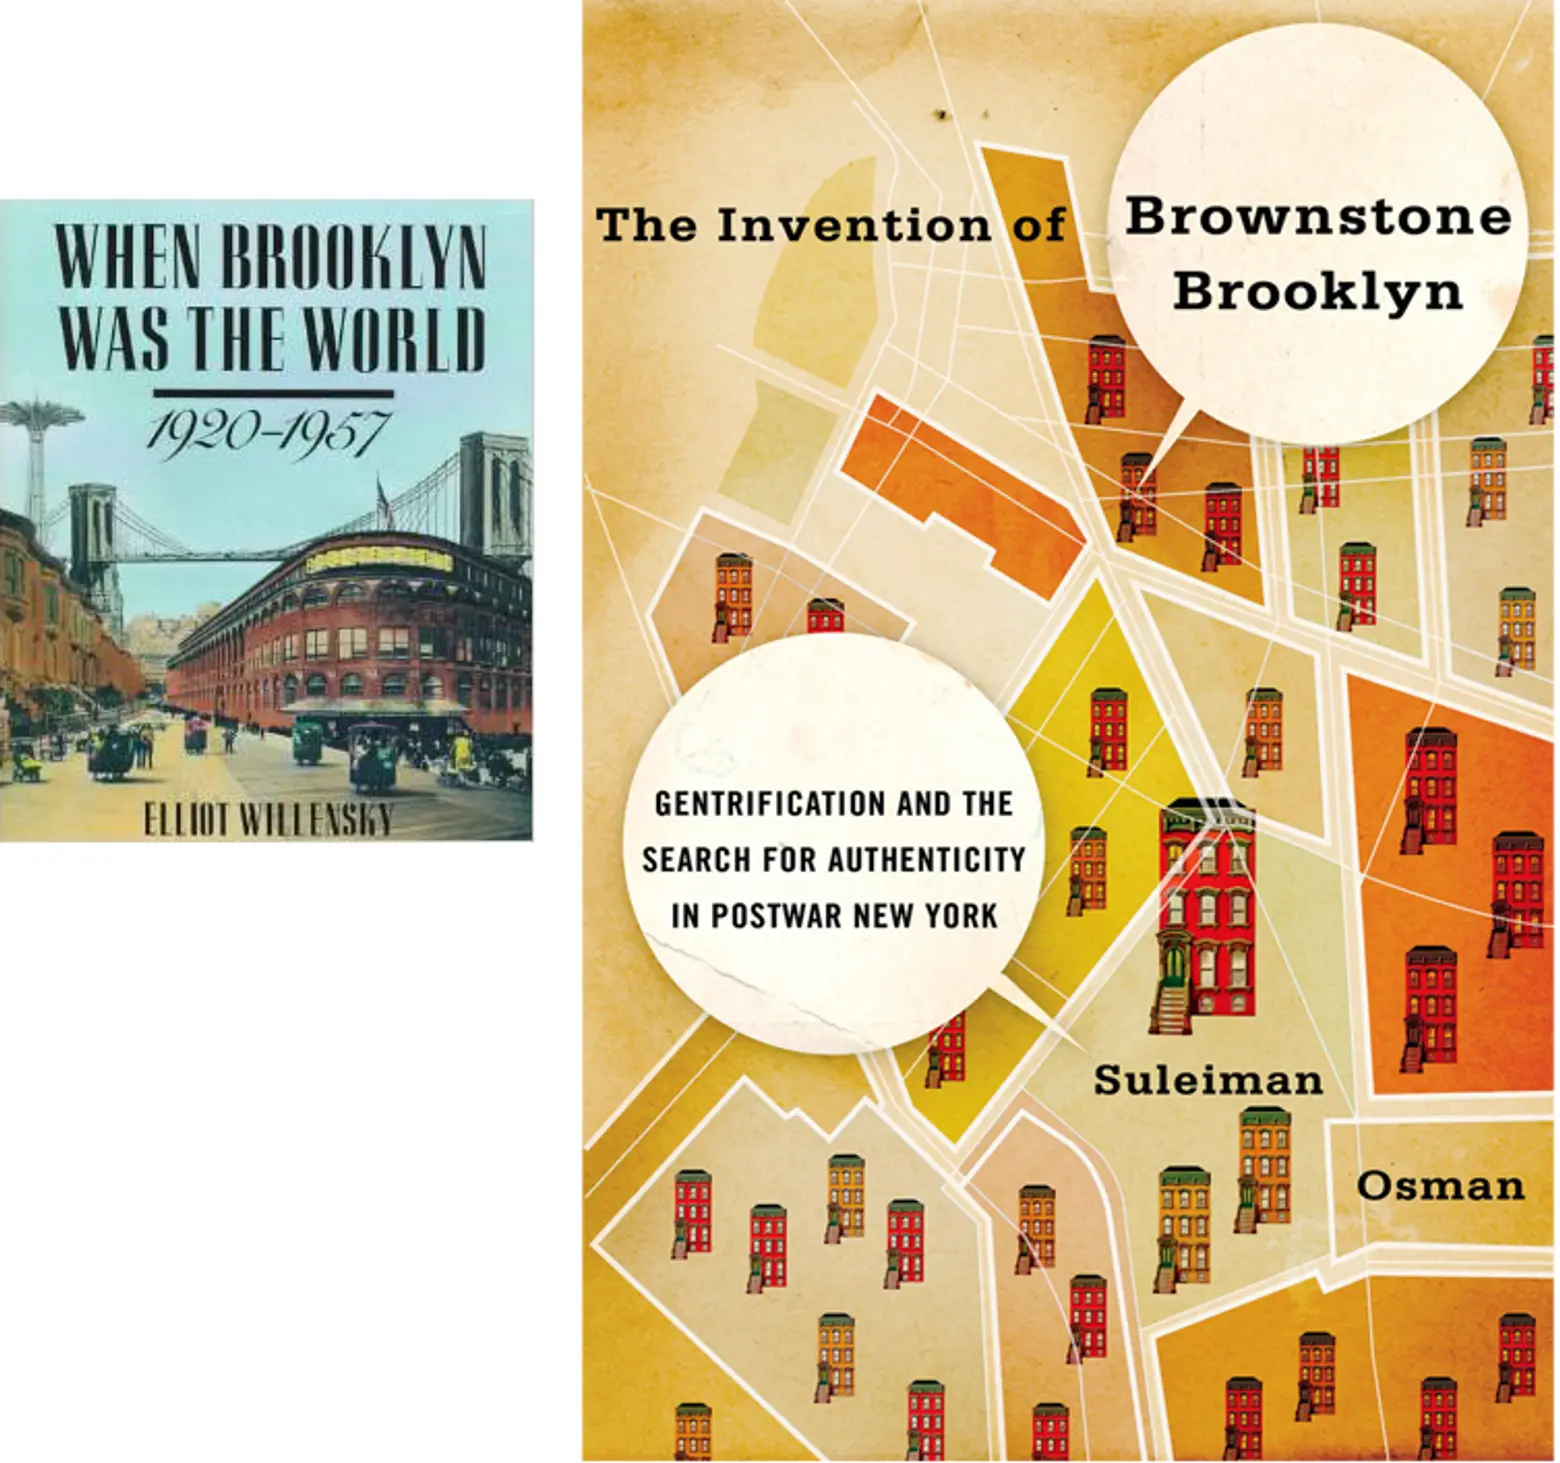 When Brooklyn Was the World 1920-1957; The Invention of Brownstone Brooklyn, Suleiman Osman, Elliott Willensky, Gentrification, brownstoners, history, nostalgia, NYC